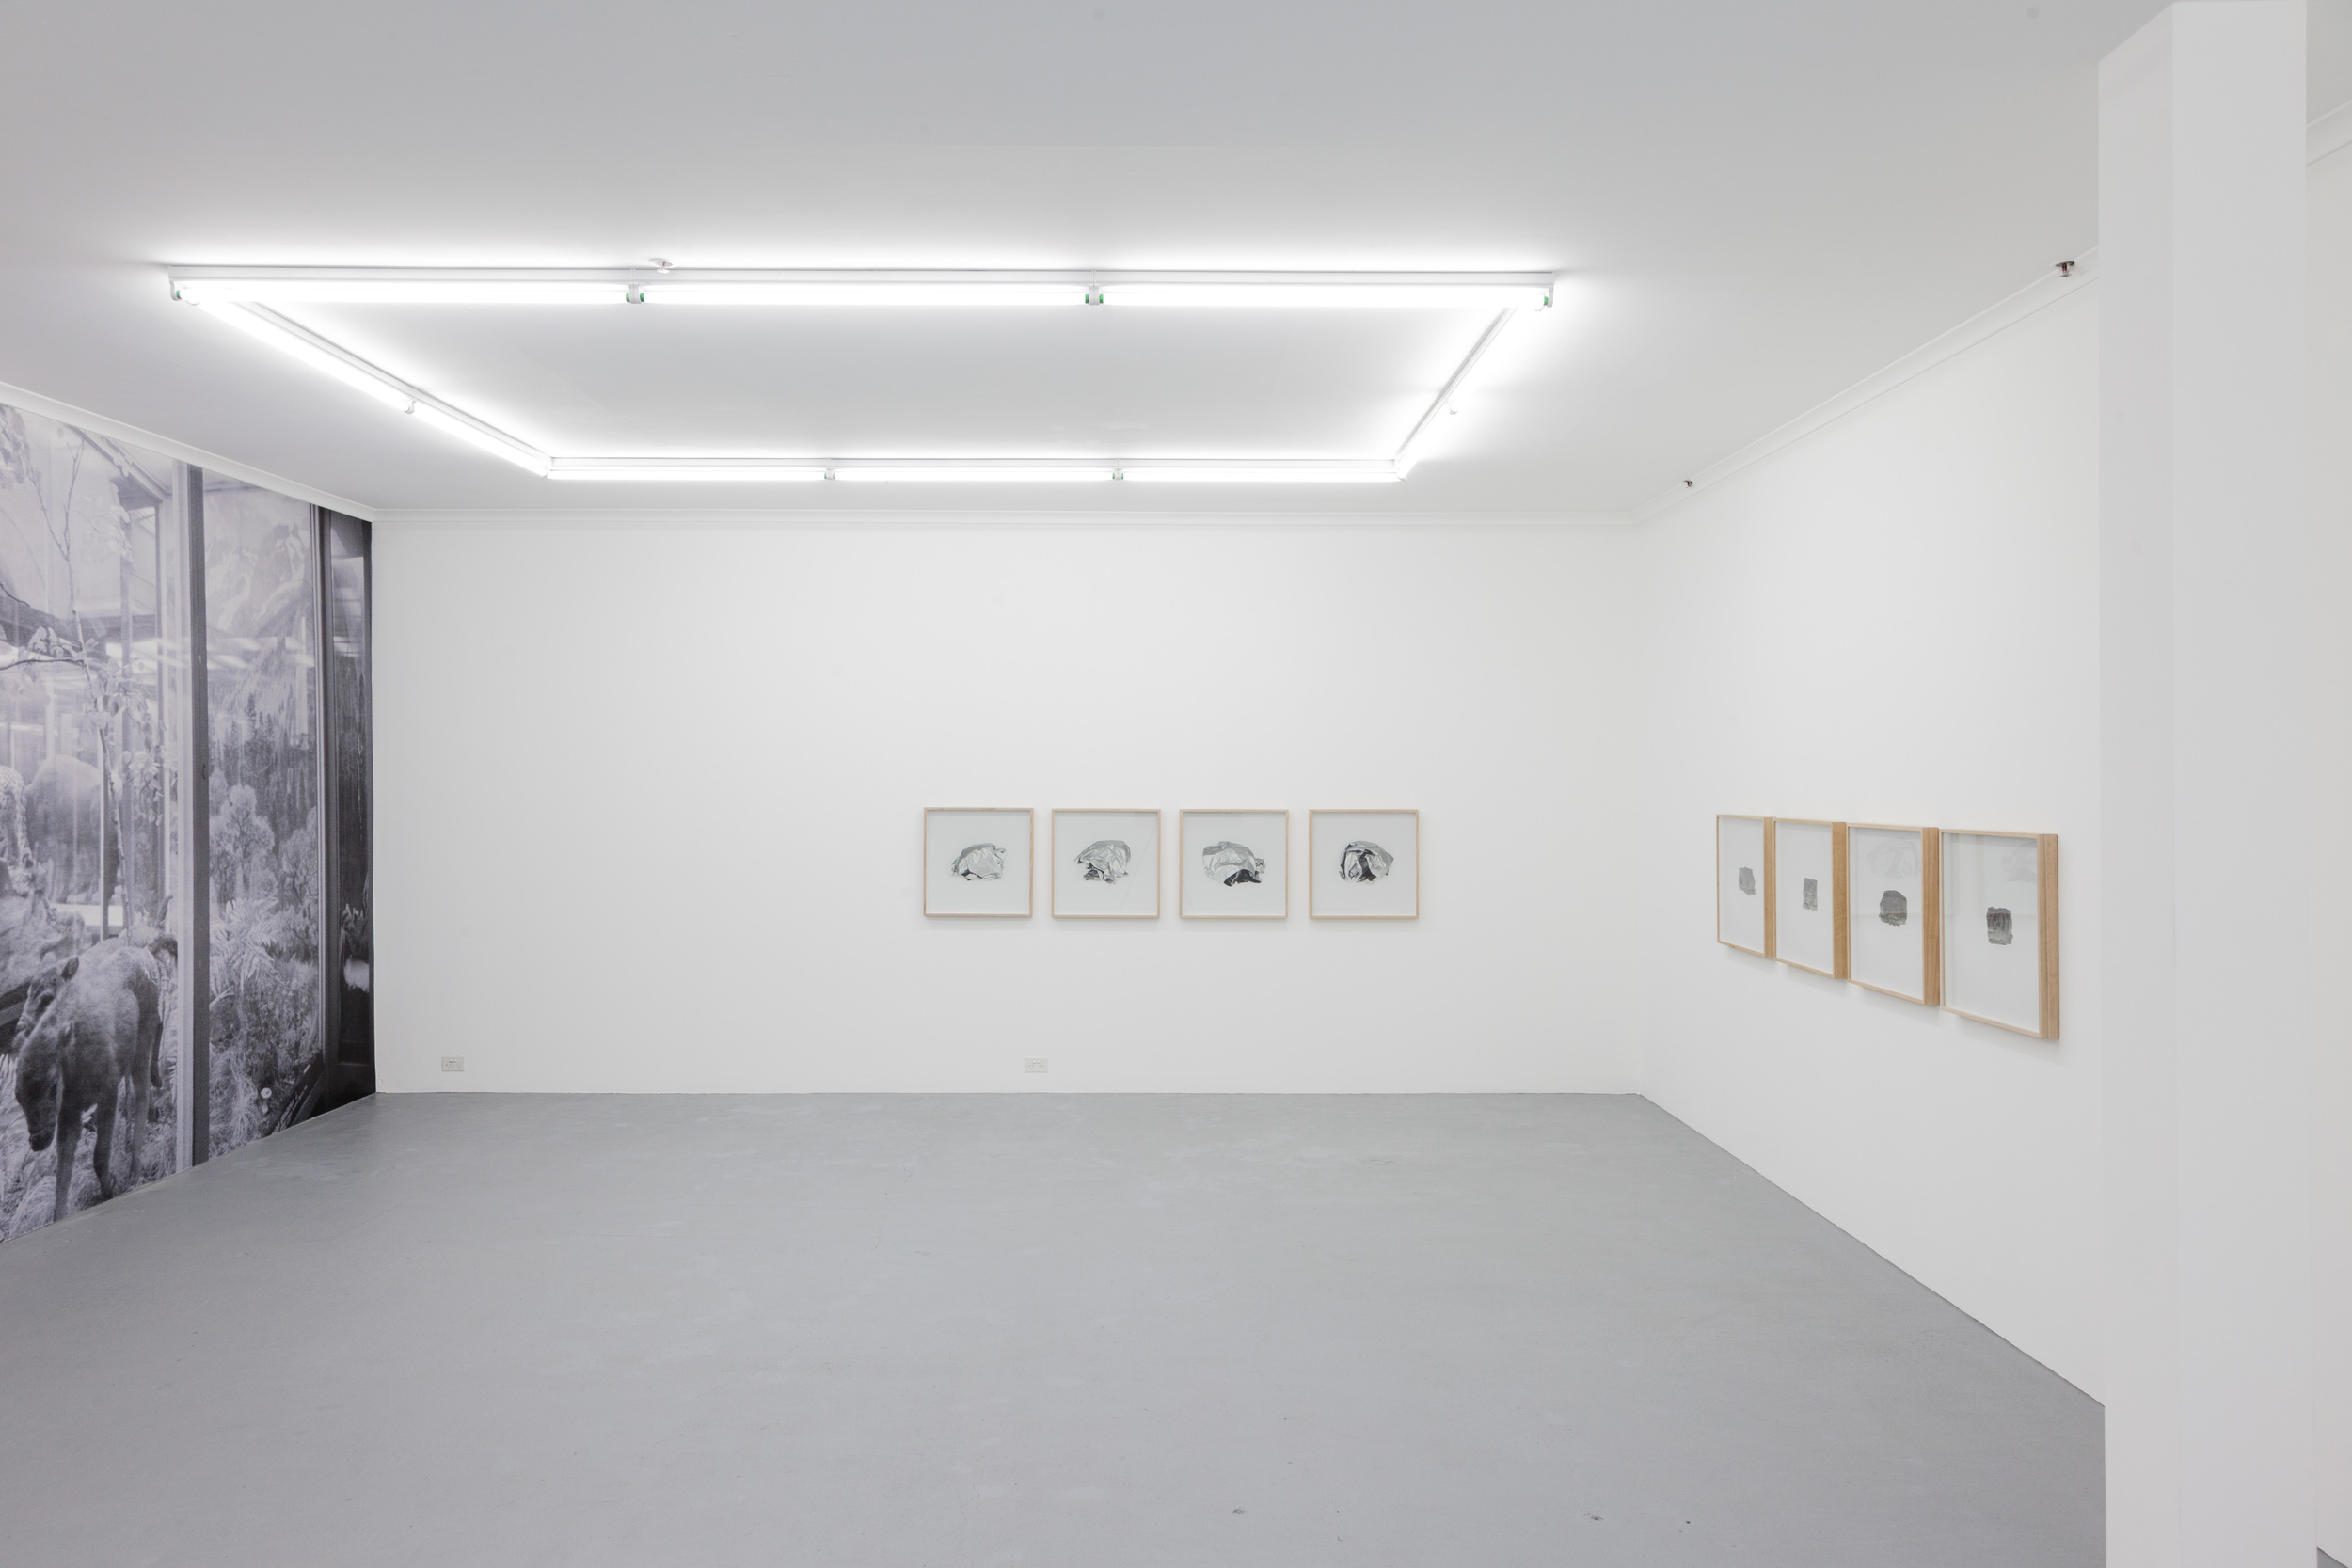    Agency of inanimate objects     2014  installation view 